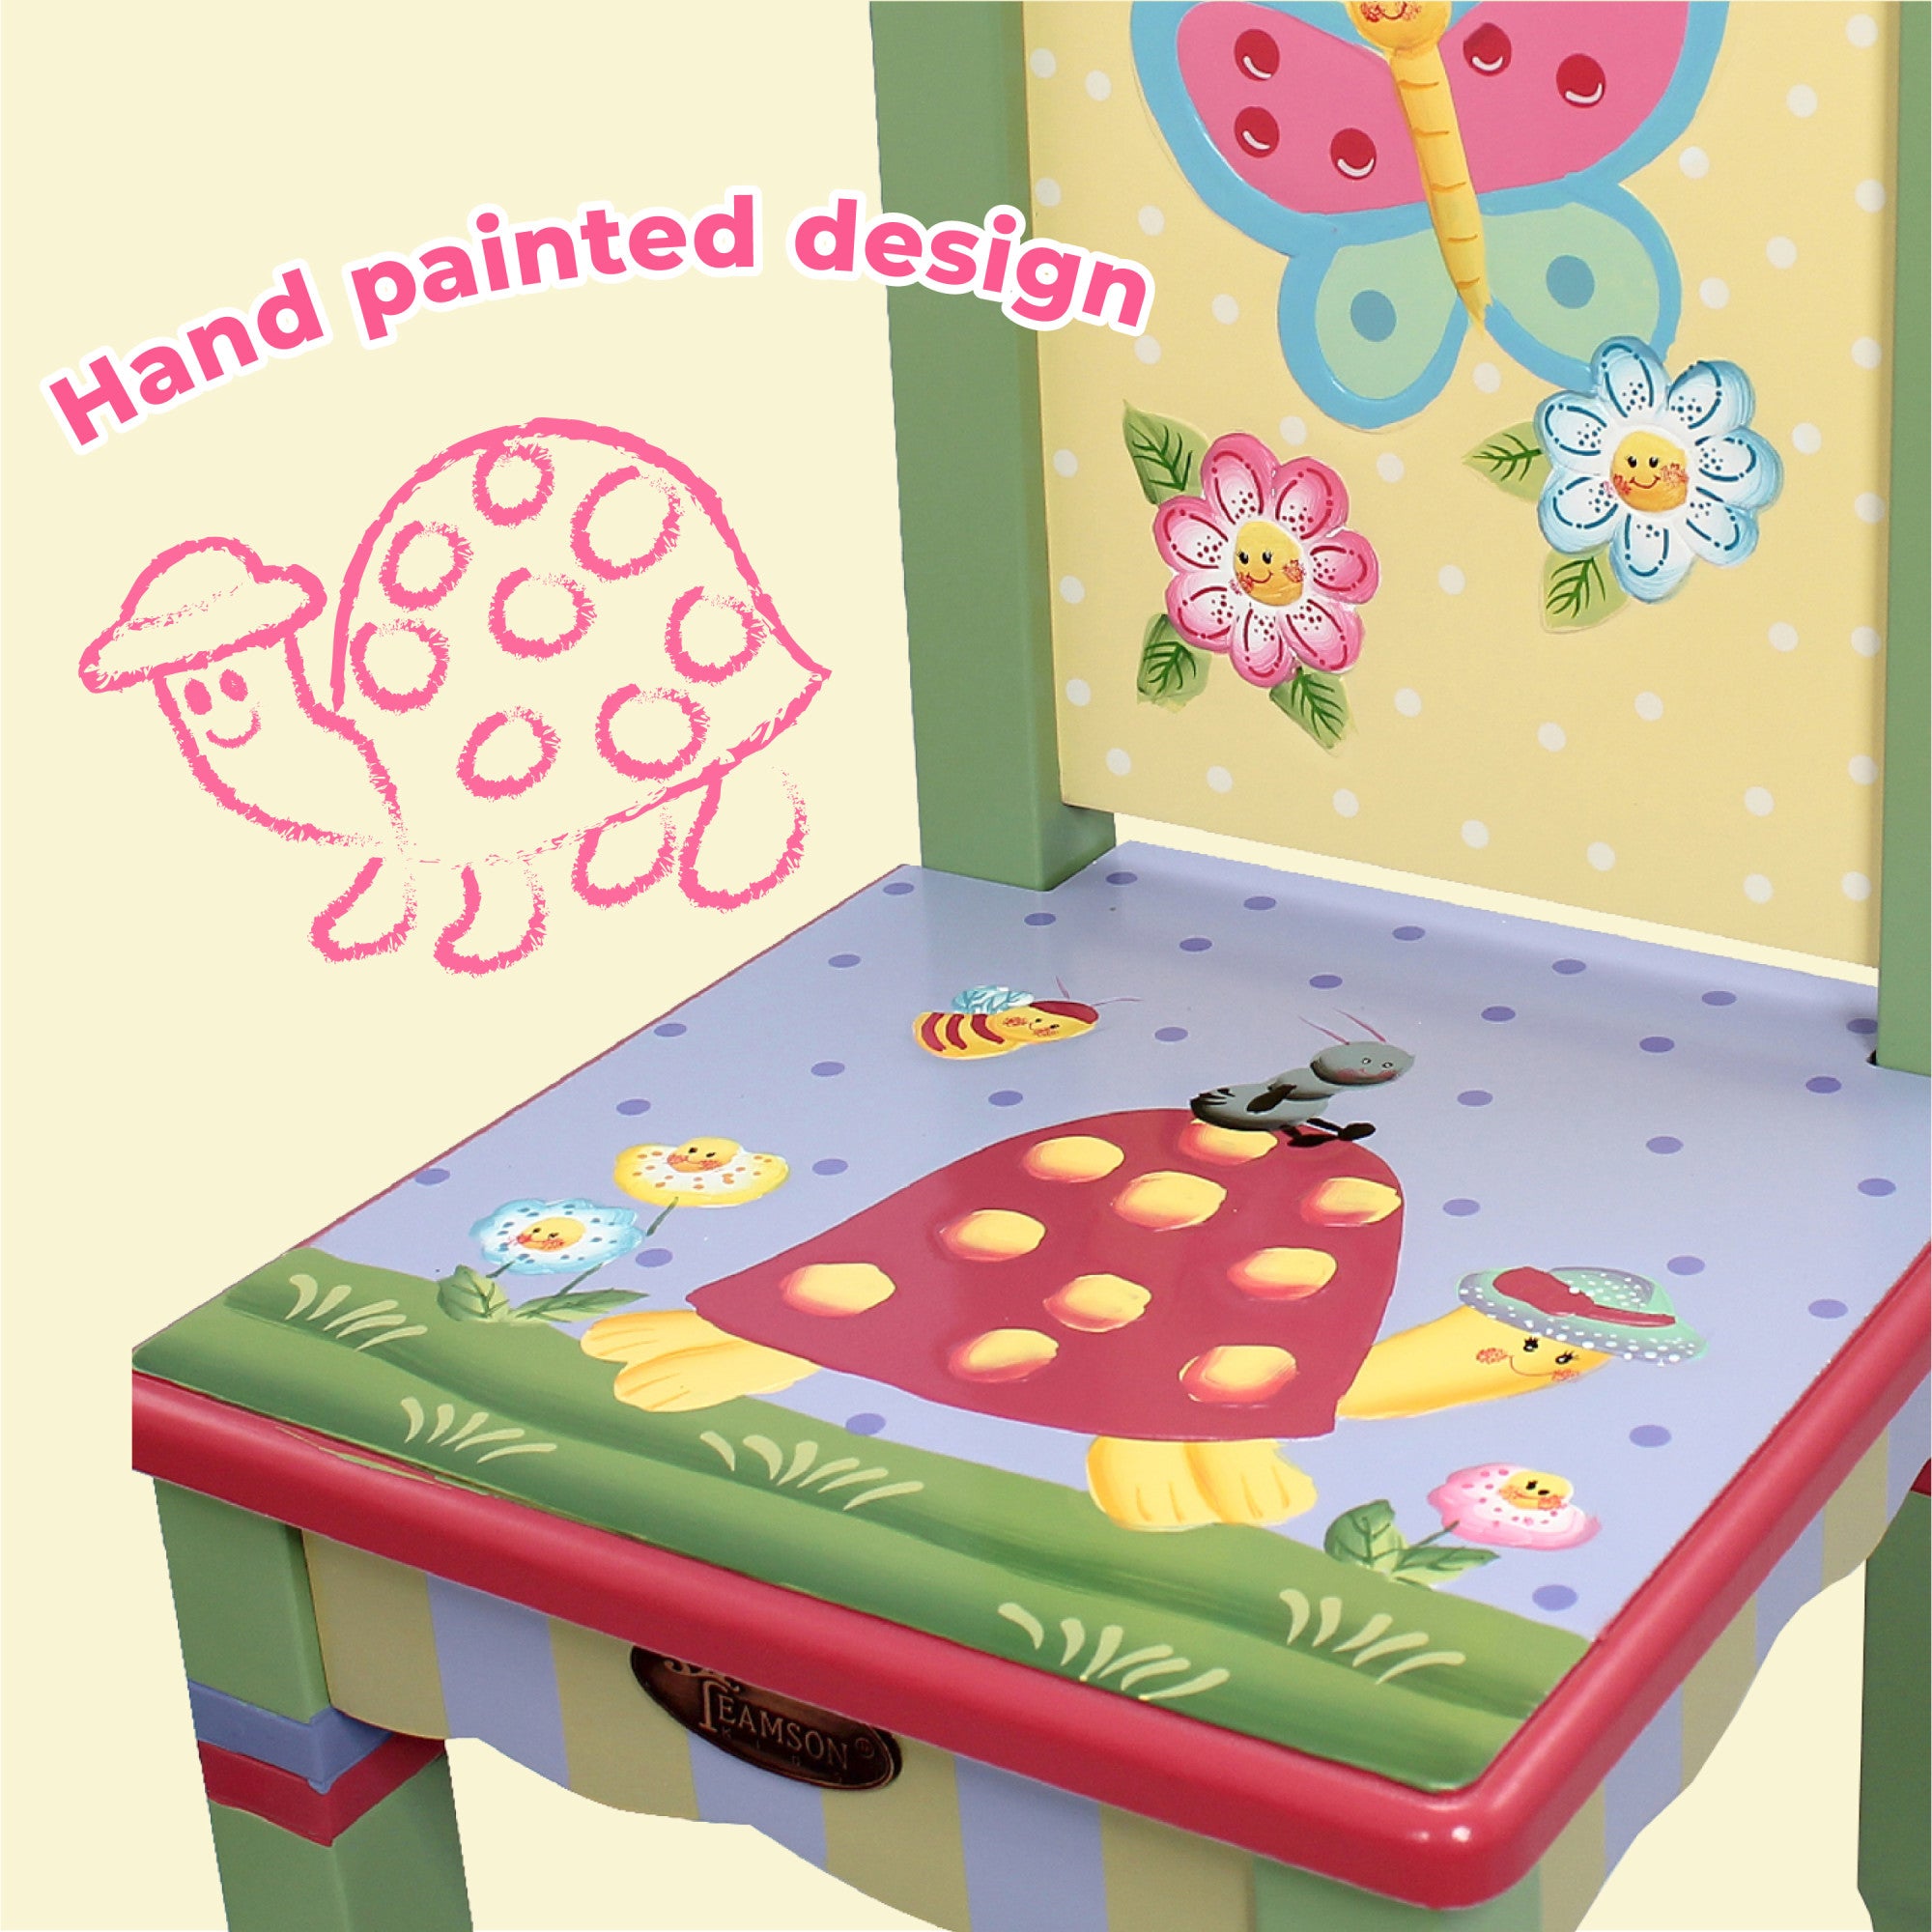 Fantasy Fields Kids Painted Wooden Magic Garden Table with 2 Chairs, Multicolor